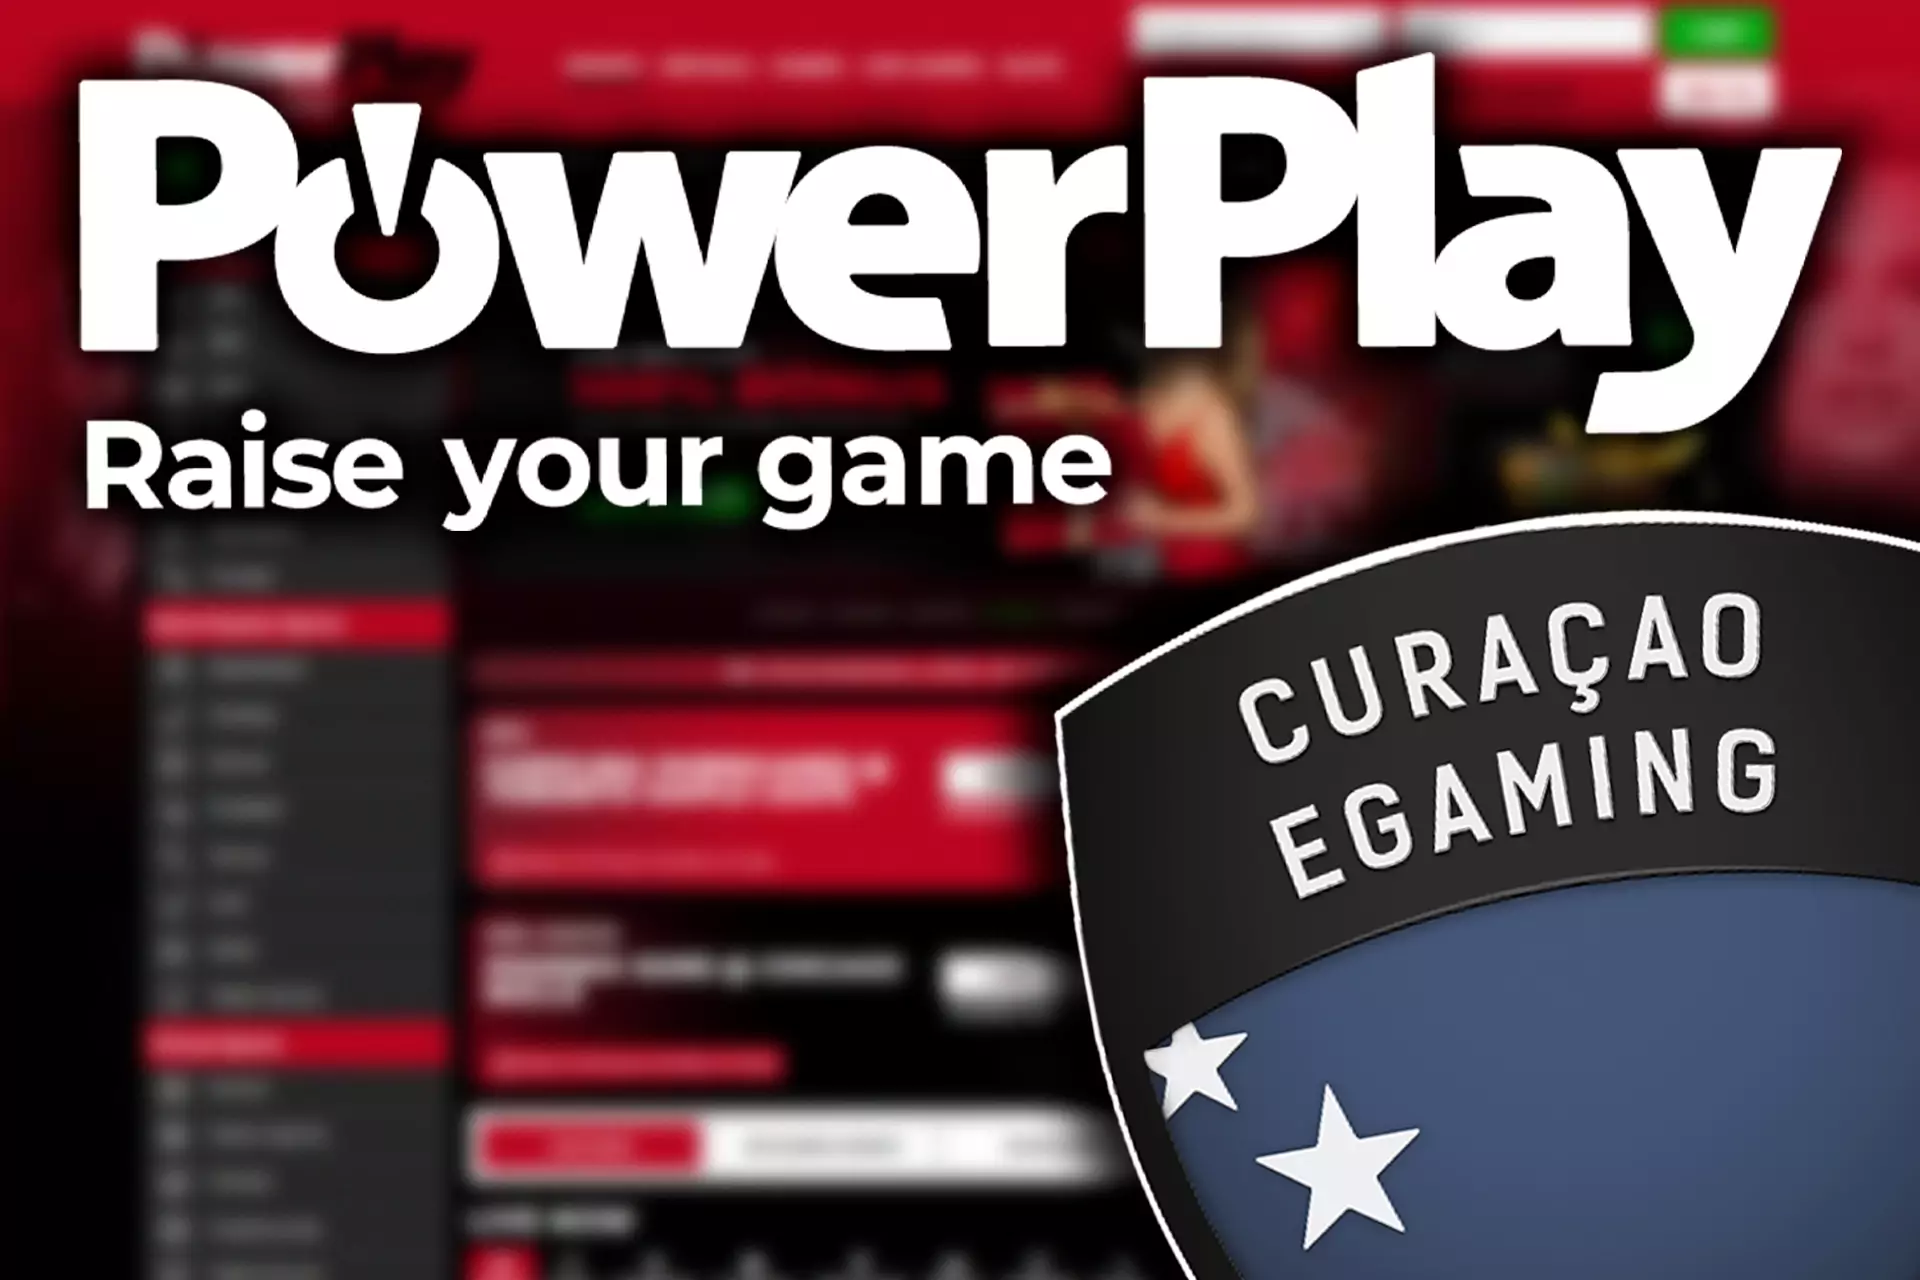 The PowerPlay site is legal and secure since it has the Curacao Egaming license.